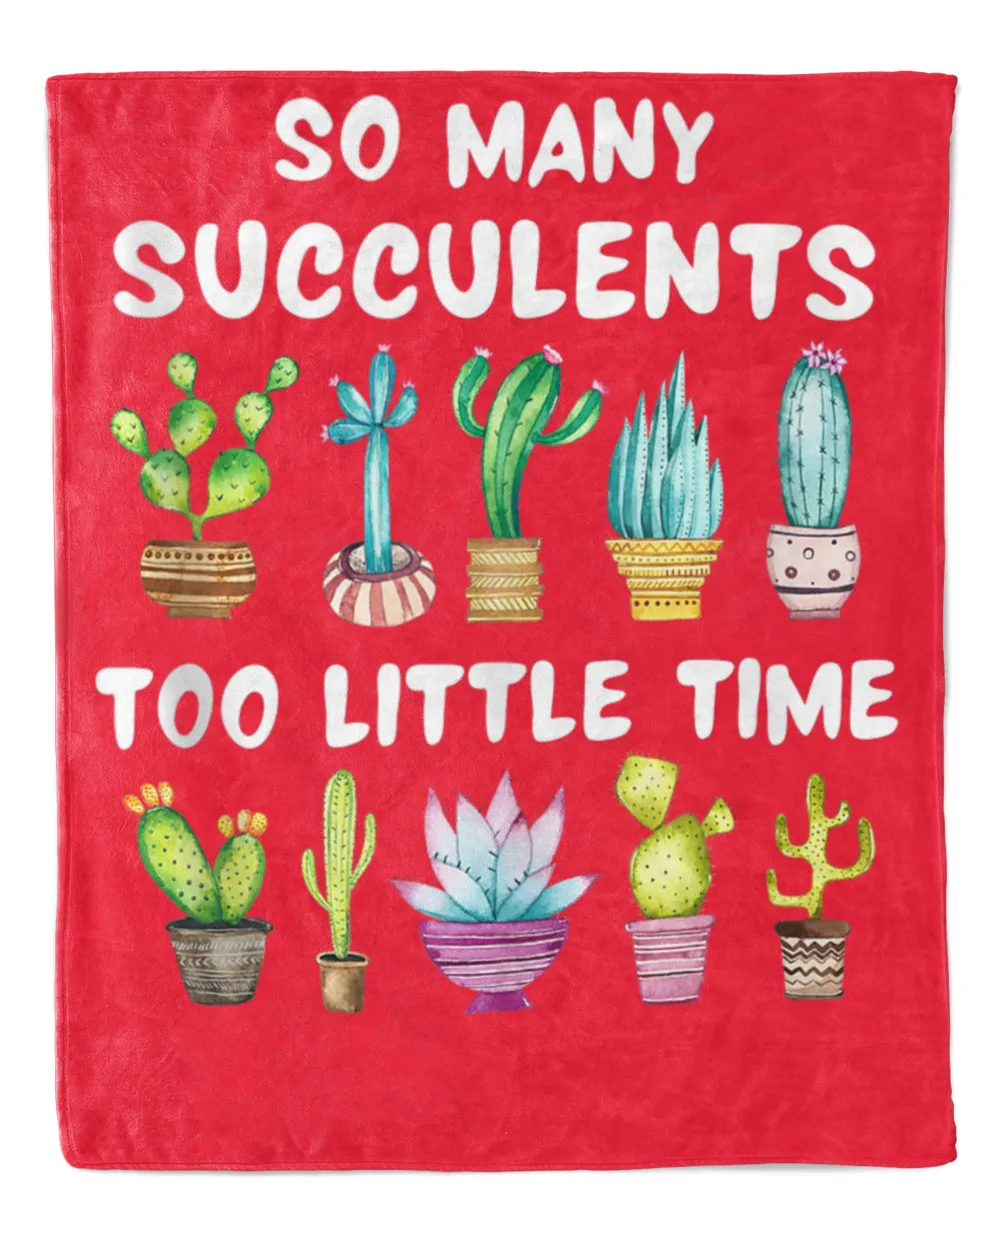 So Many Succulents Funny Cactus Gardening